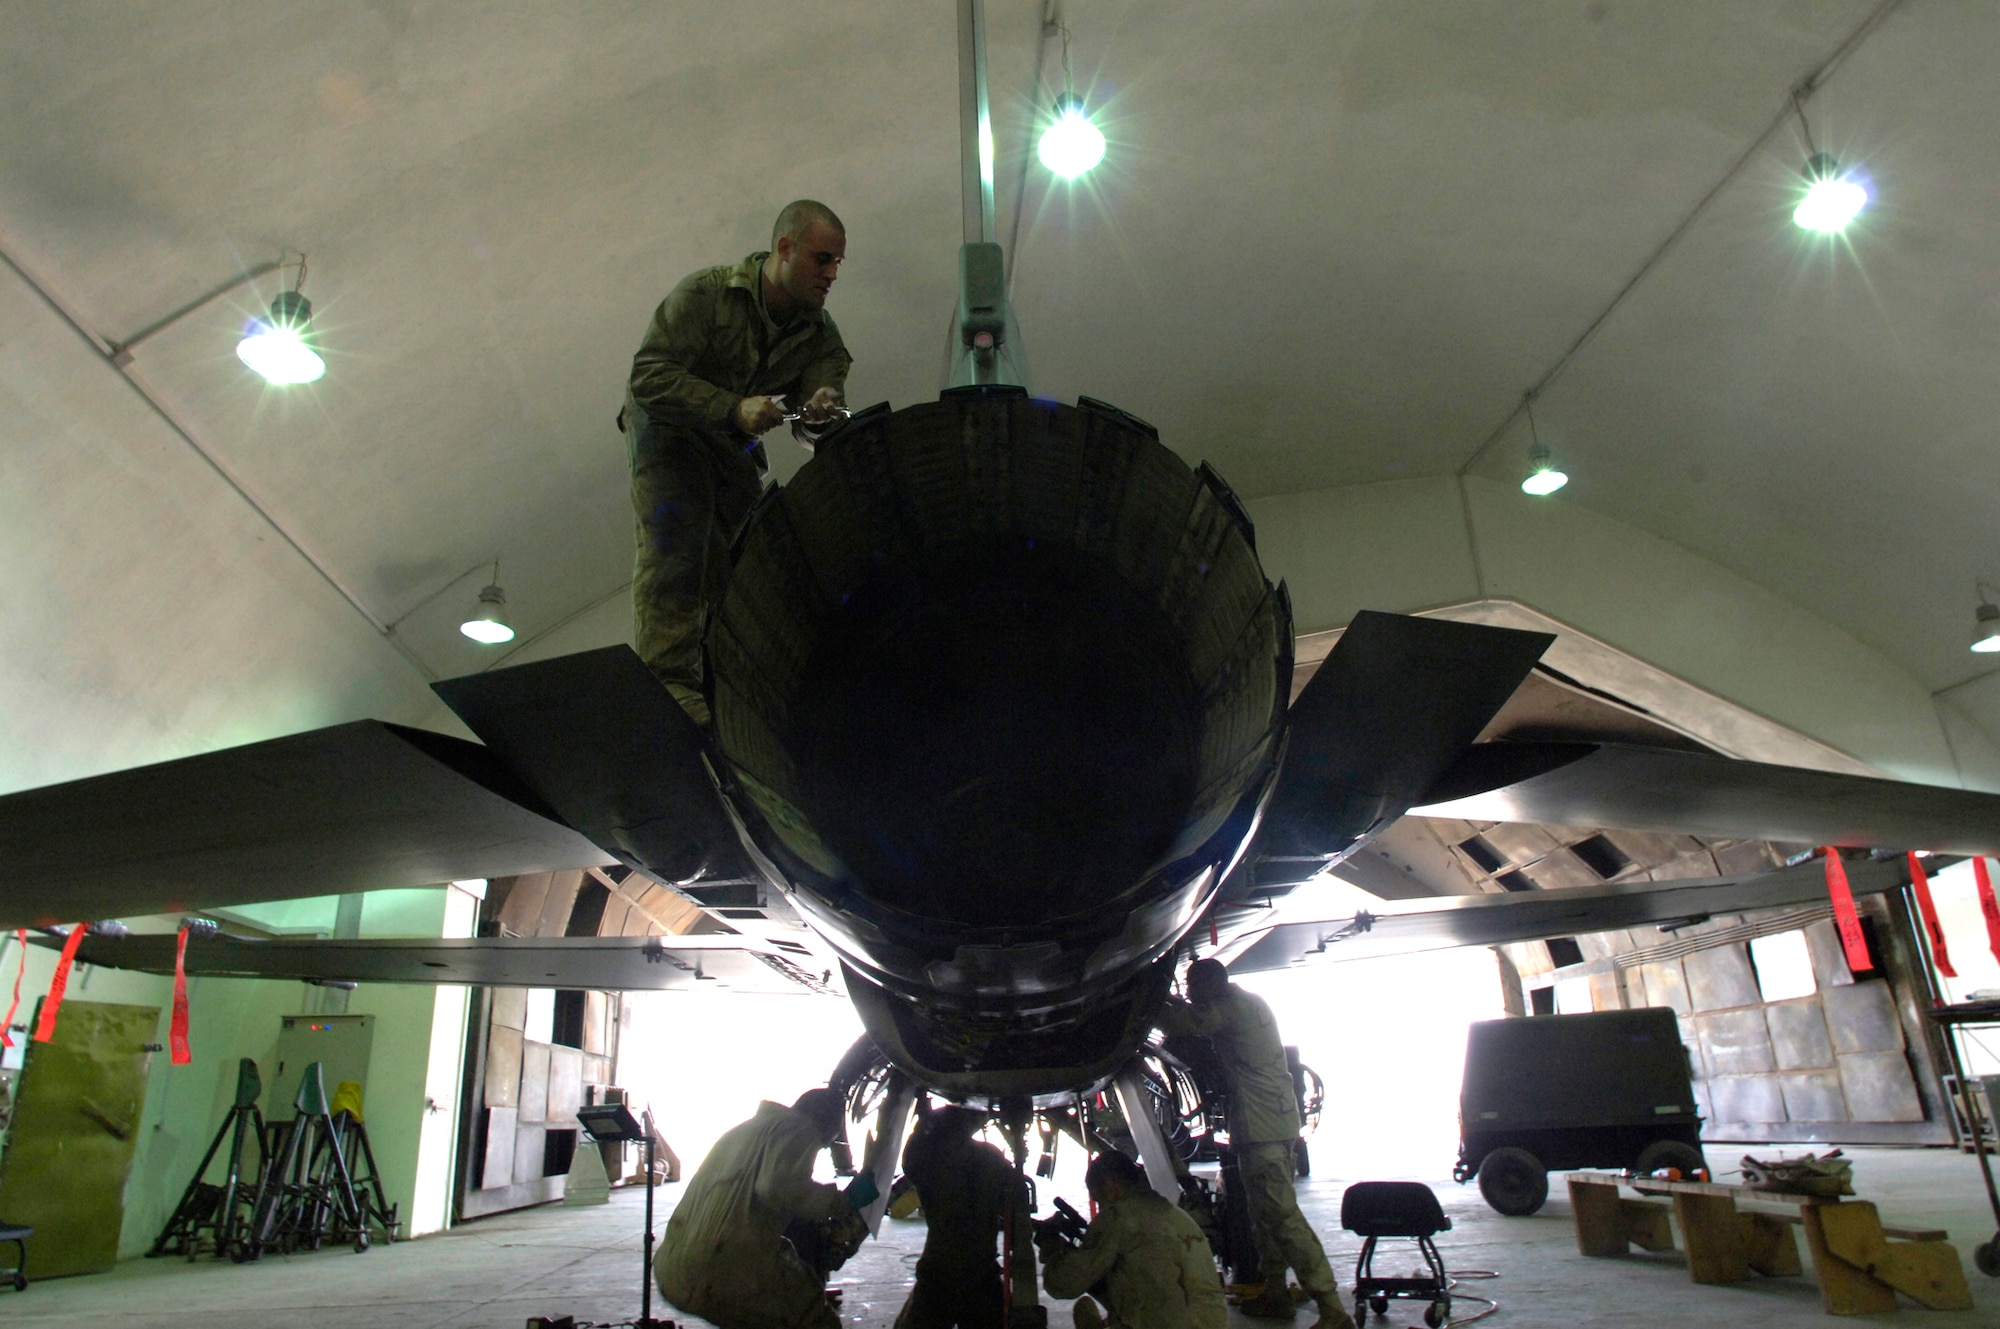 BALAD AIR BASE, Iraq -- Staff Sgt. Justin Johnson, 332nd Expeditionary Maintenance Squadron phase inspection team member, removes screws off of an F-16 rudder. Sergeant Johnson is deployed here with other Misawa Airmen from the 35th Aircraft Maintenance Squadron. (U.S. Air Force photo/Airman 1st Class Nathan Doza)